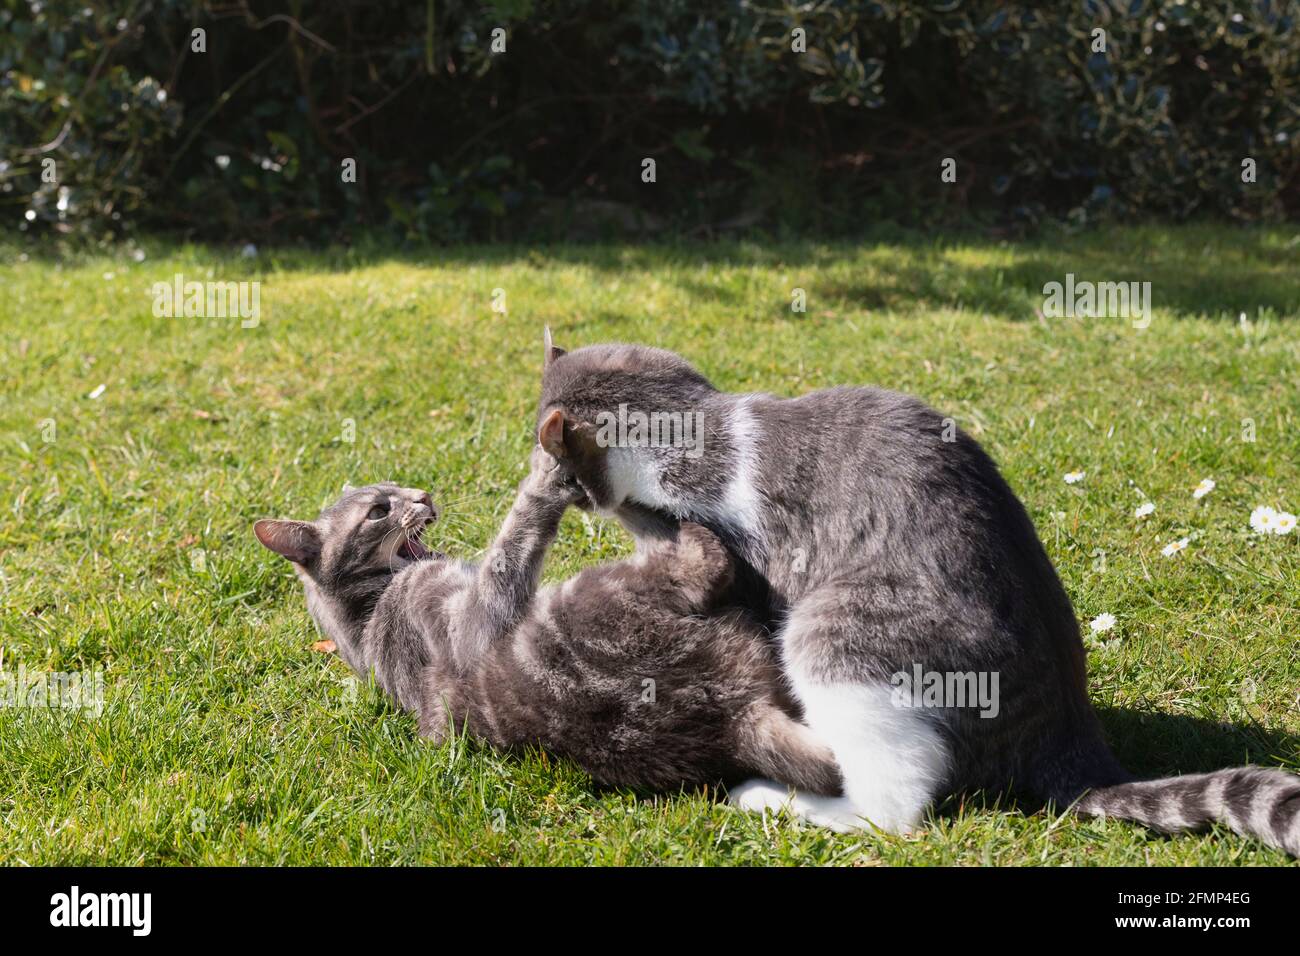 Two Pets Cats (Grey and Grey & White Tabby Cats) Play Fighting in a Garden in Sunshine Stock Photo